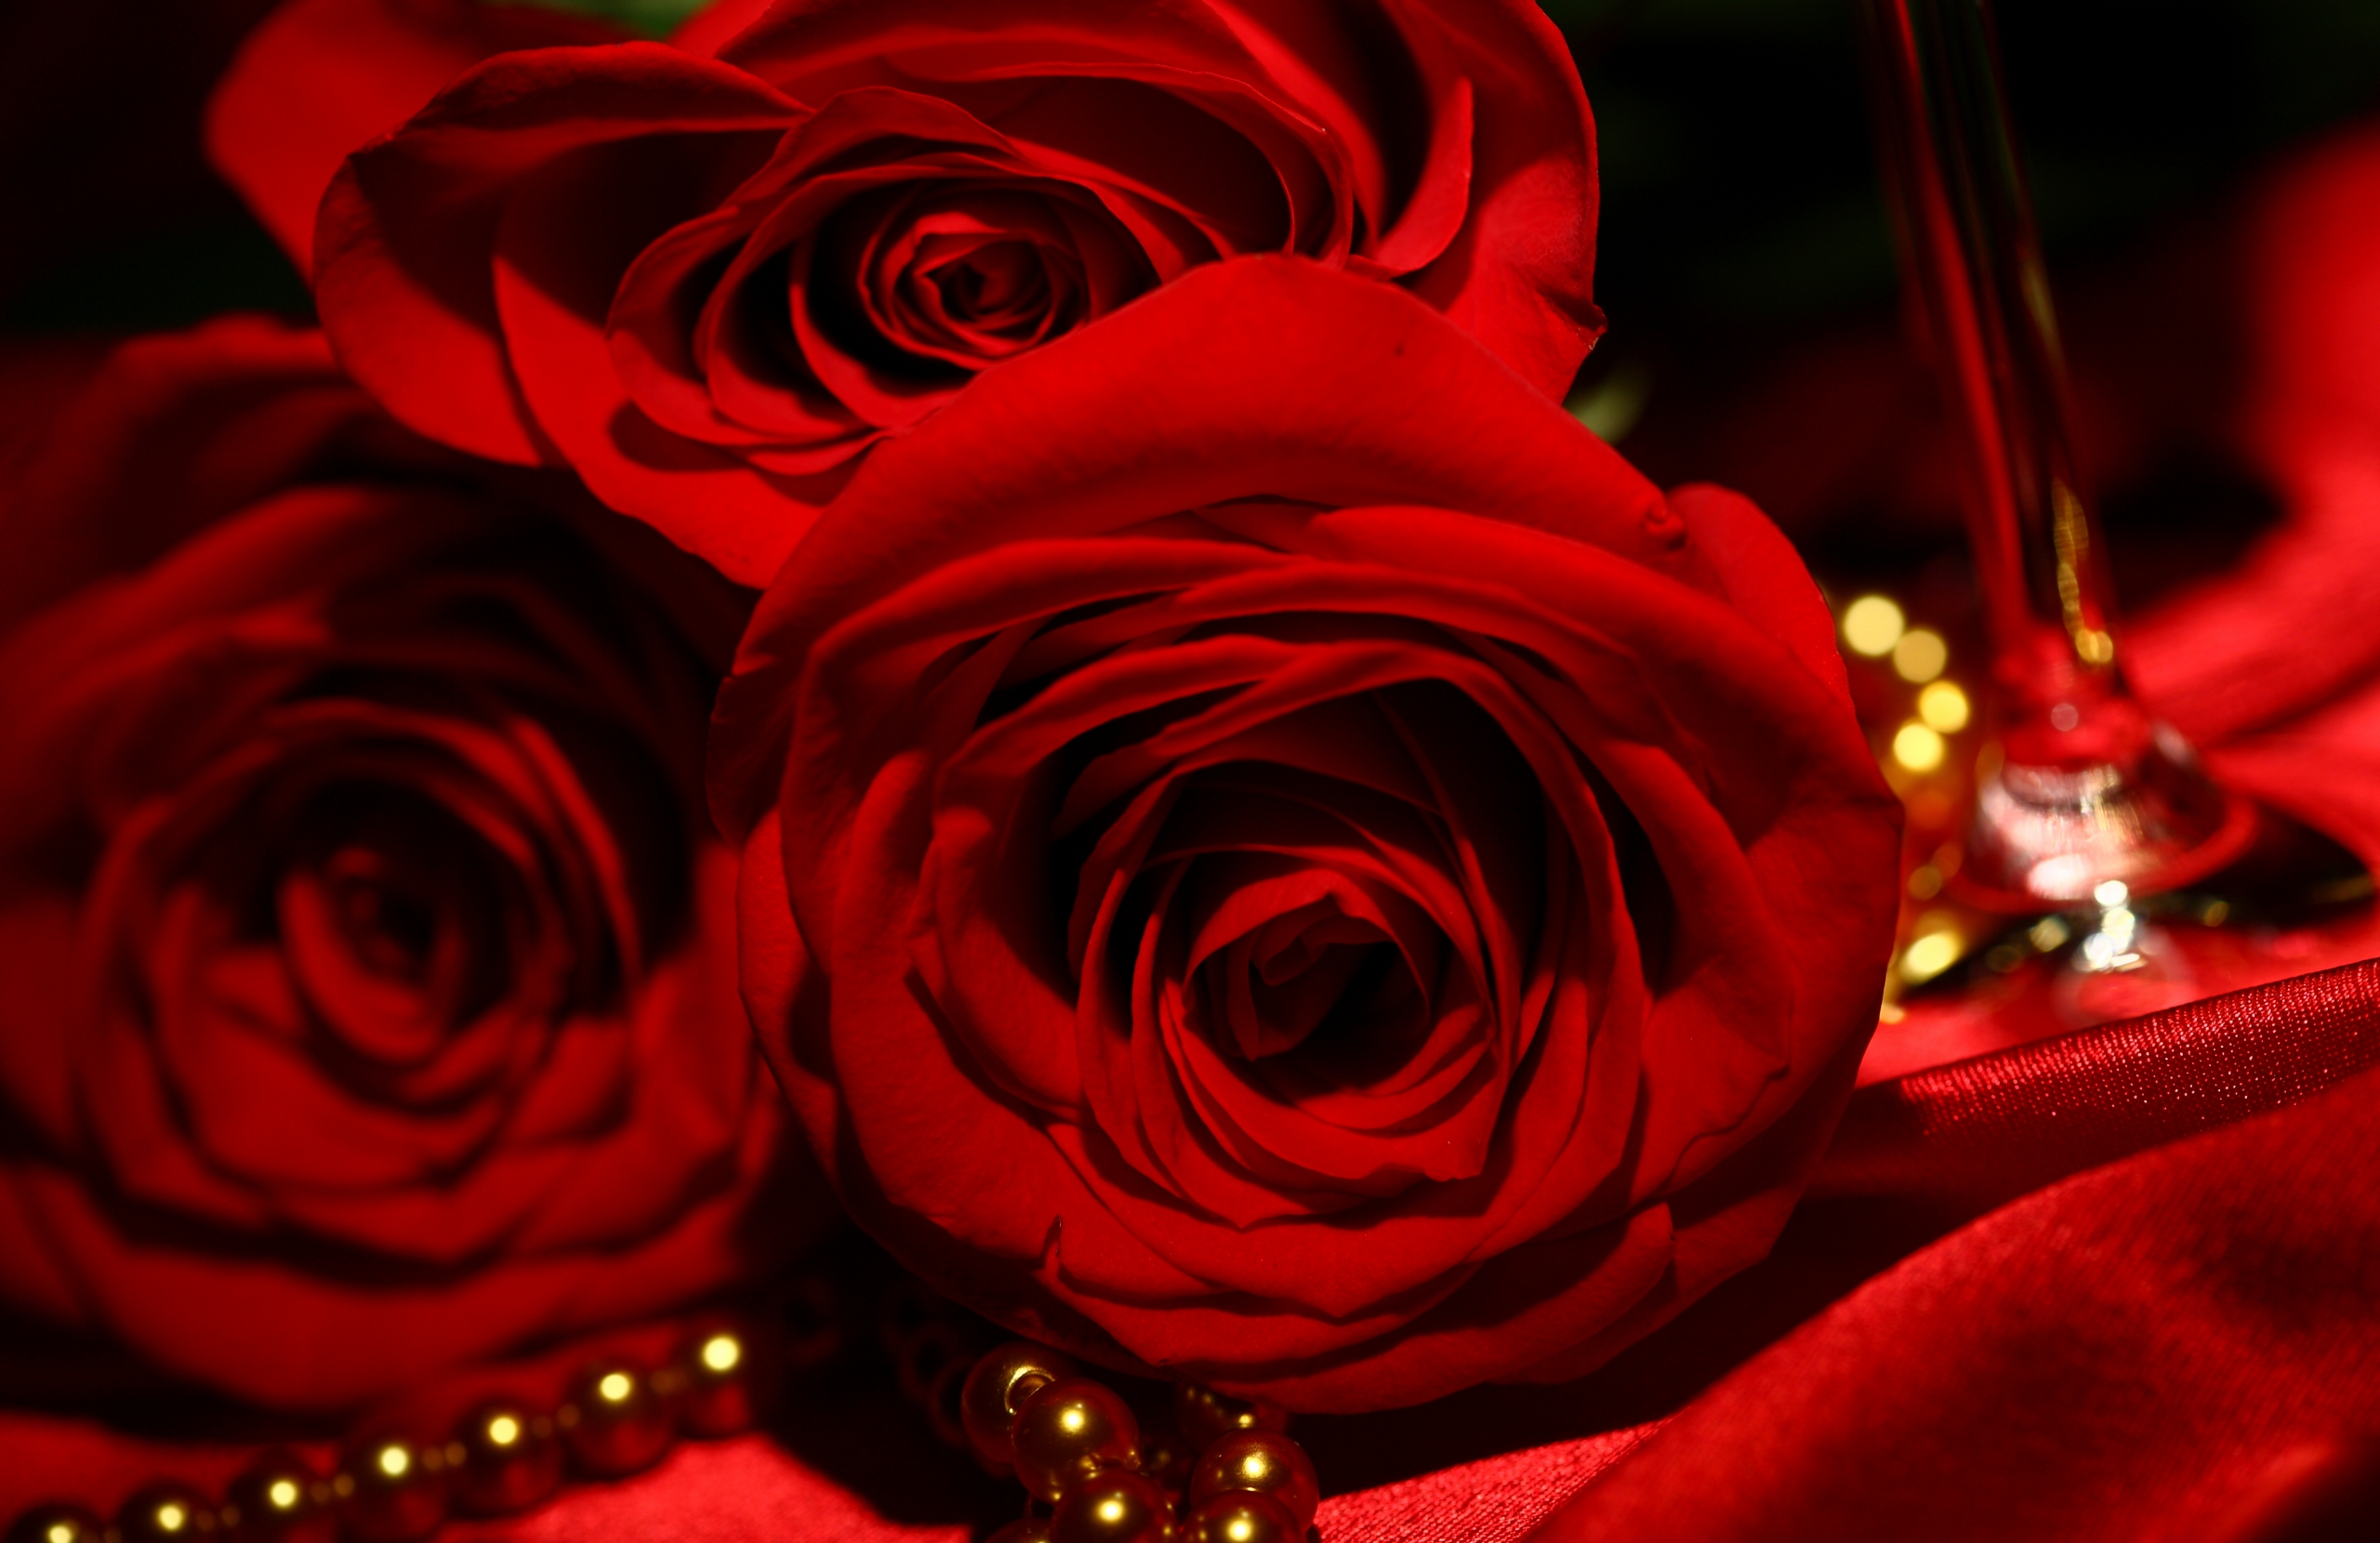 Red Roses Backgrounds   Wallpaper High Definition High 2560x1660